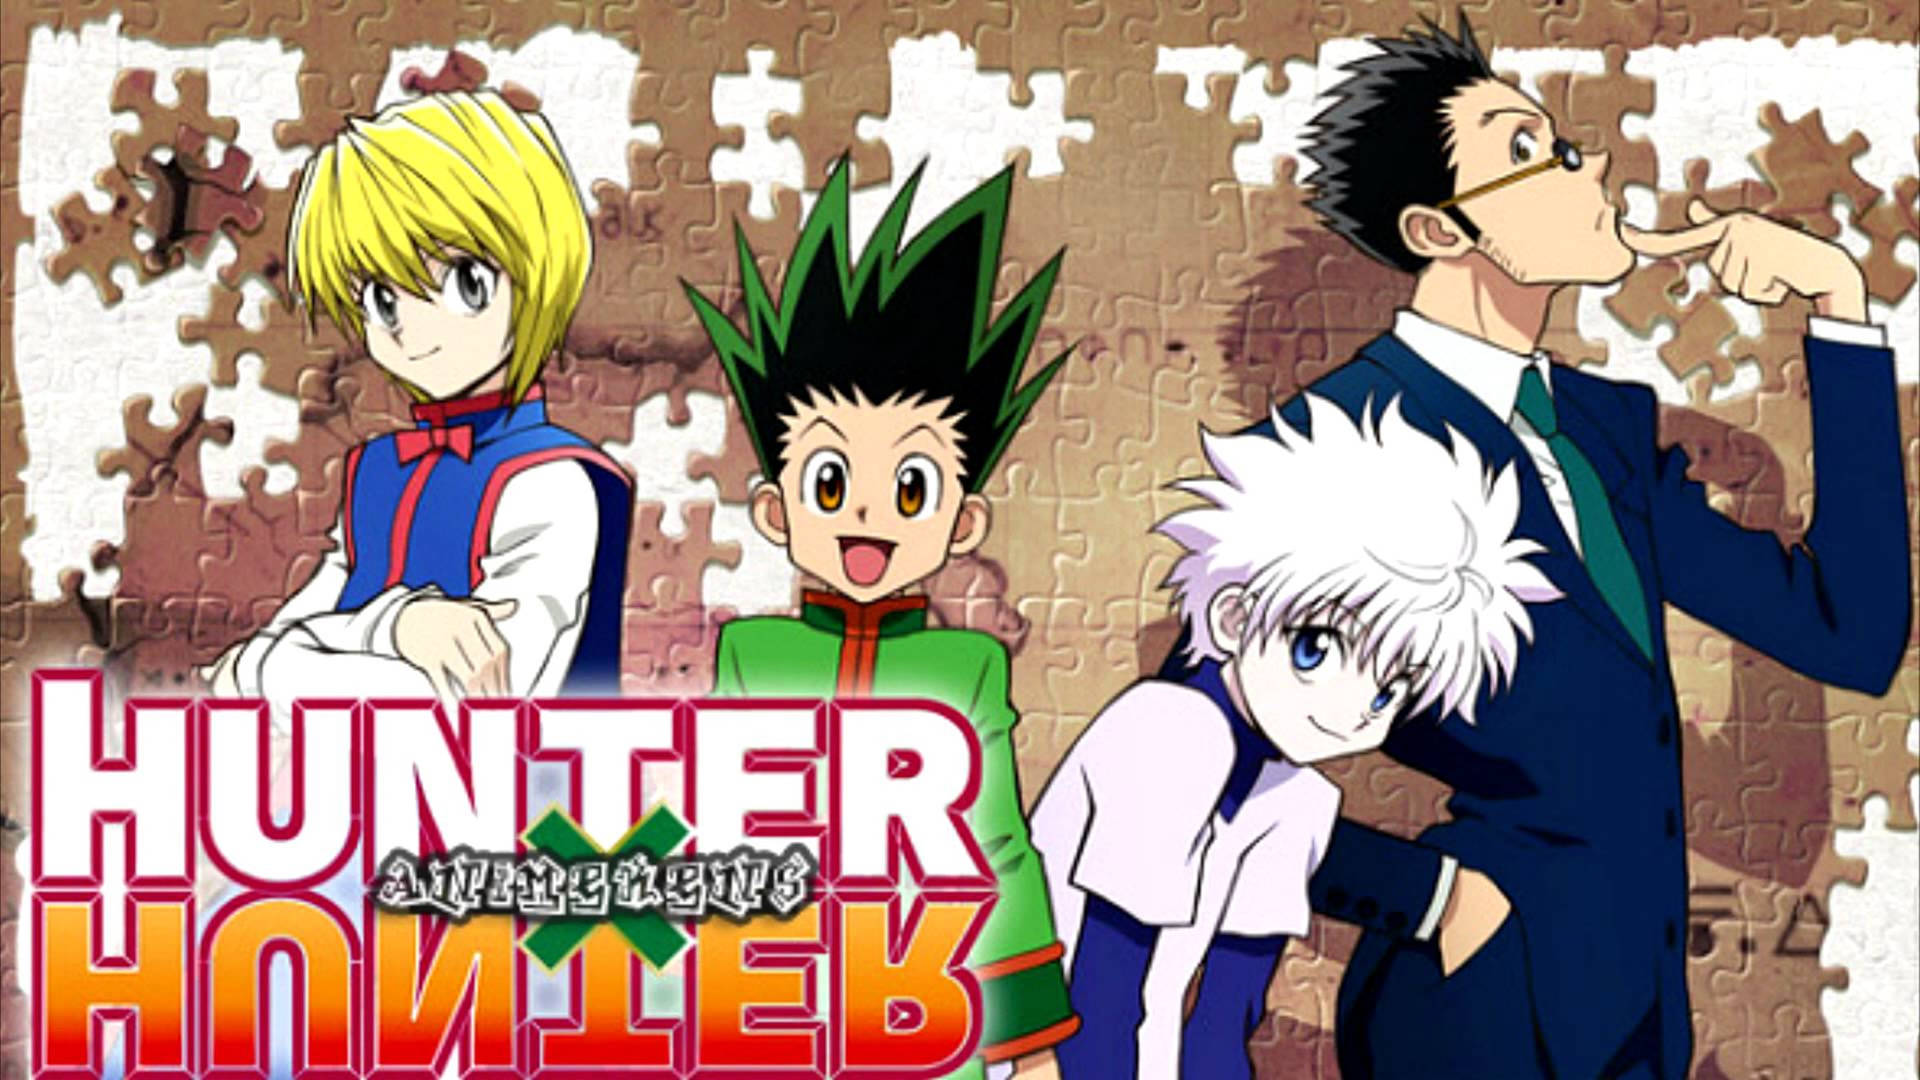 Gon Freecss and His Companions on Their Journey in Hunter X Hunter Wallpaper